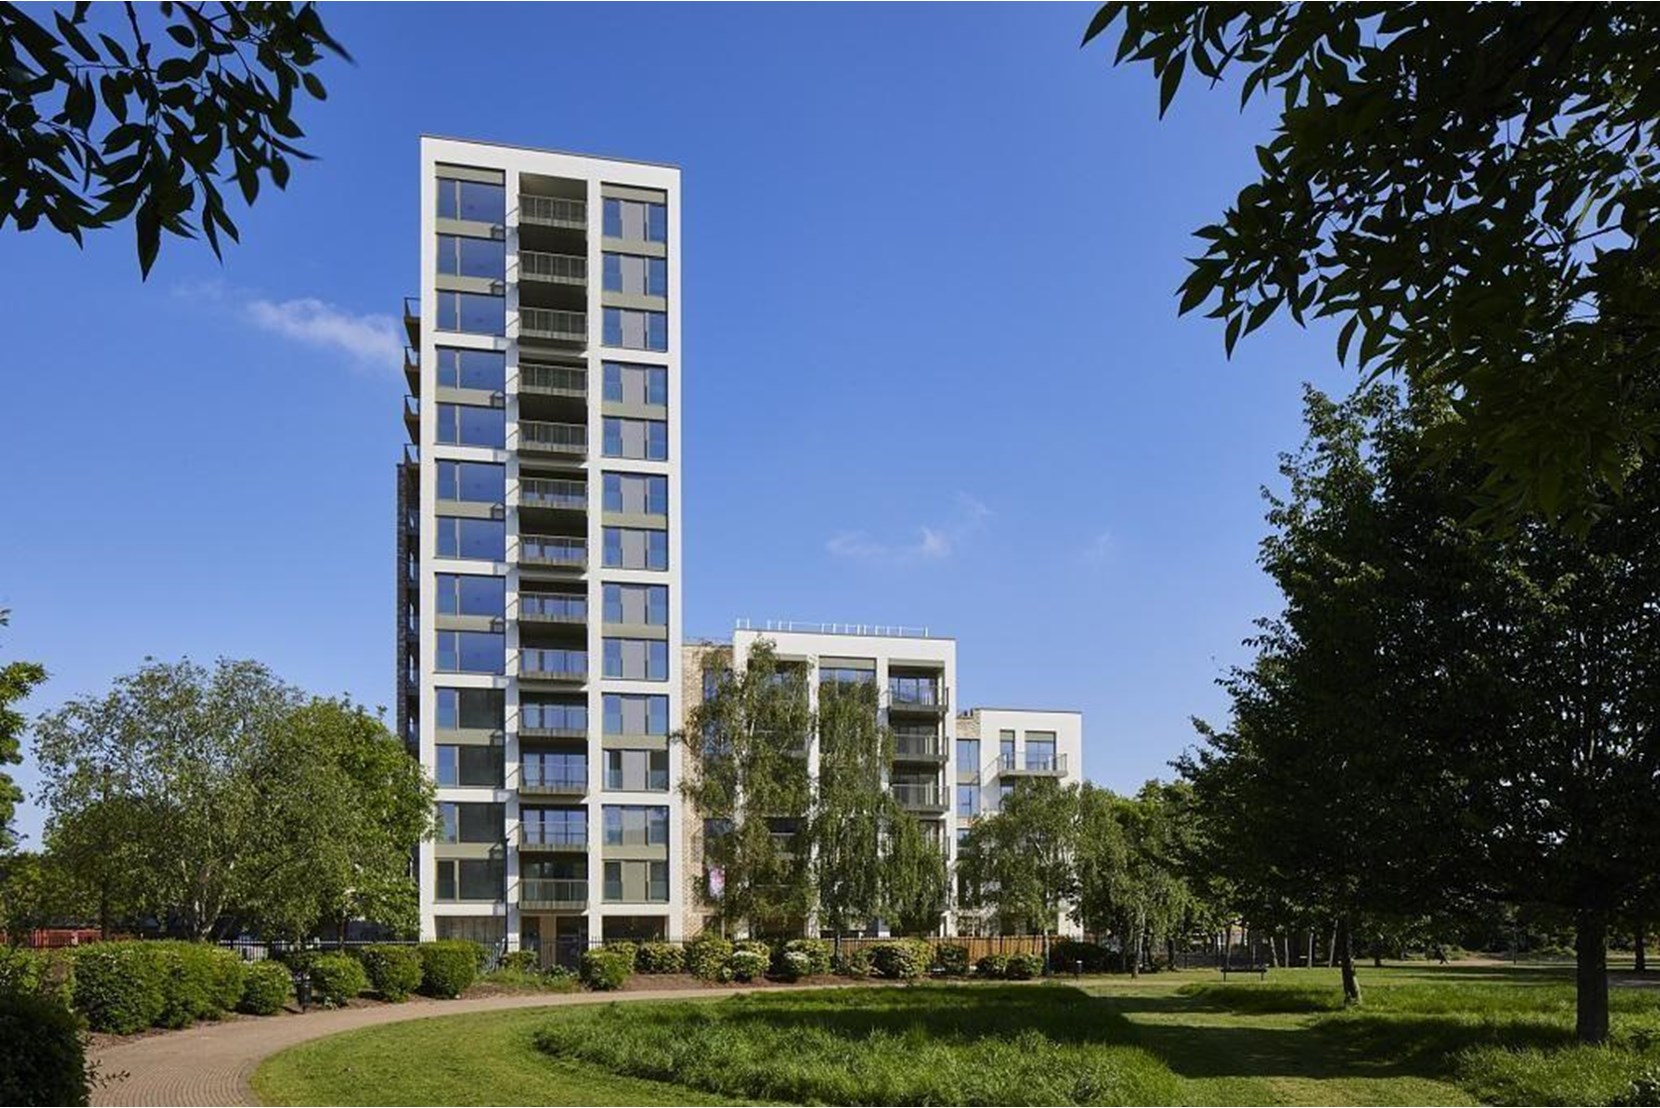 Apartments to Rent by Savills at The Forge, Newham, E6, development panoramic